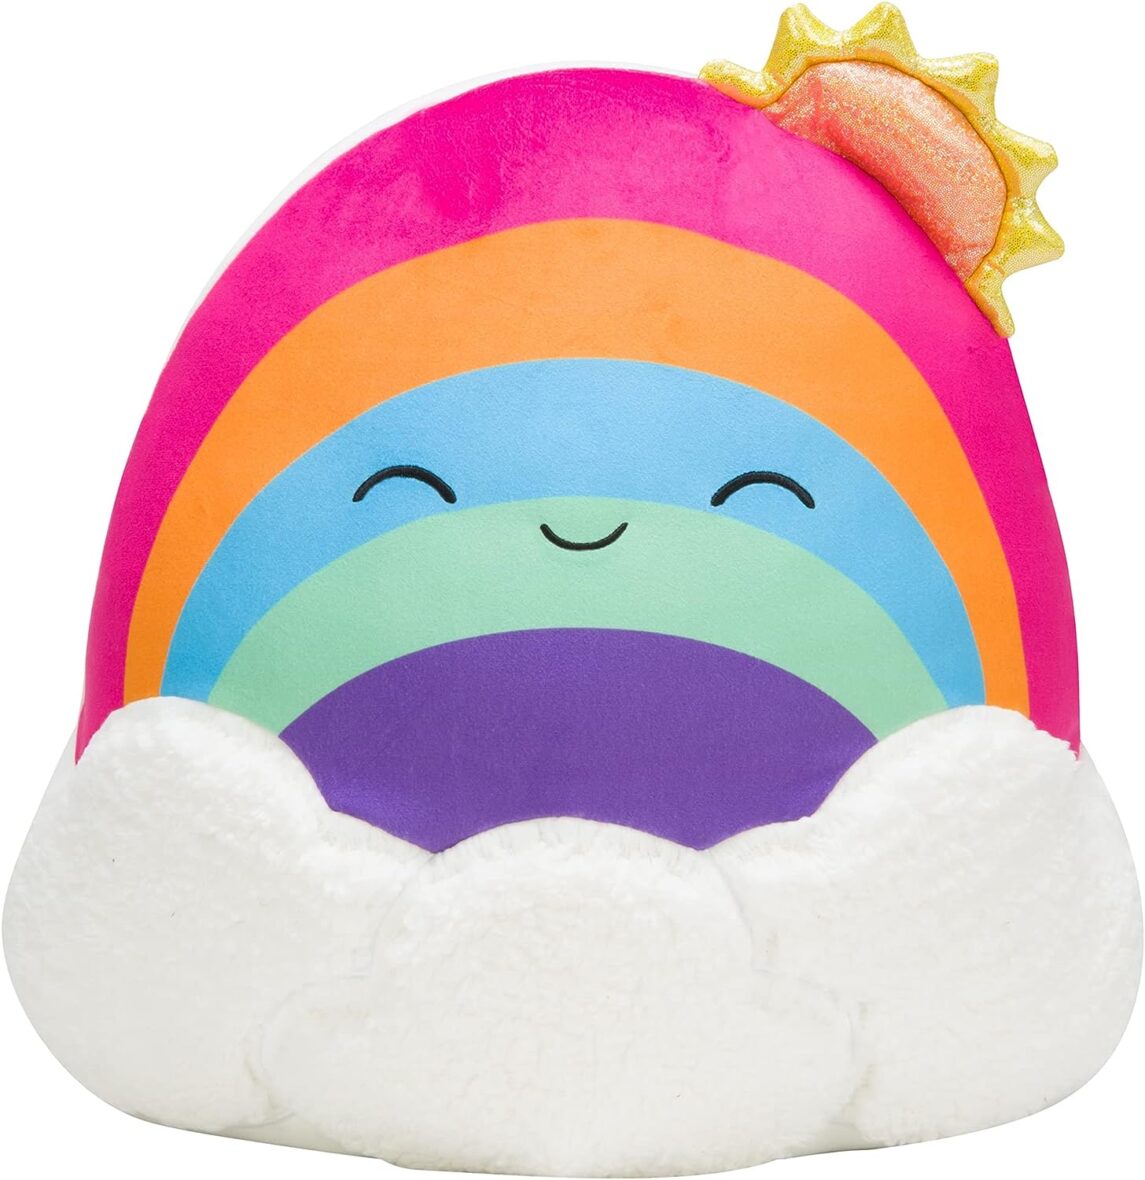 Squishmallows Original 14-Inch Sunshine Rainbow with Clouds – Large Ultrasoft Official Jazwares Plush